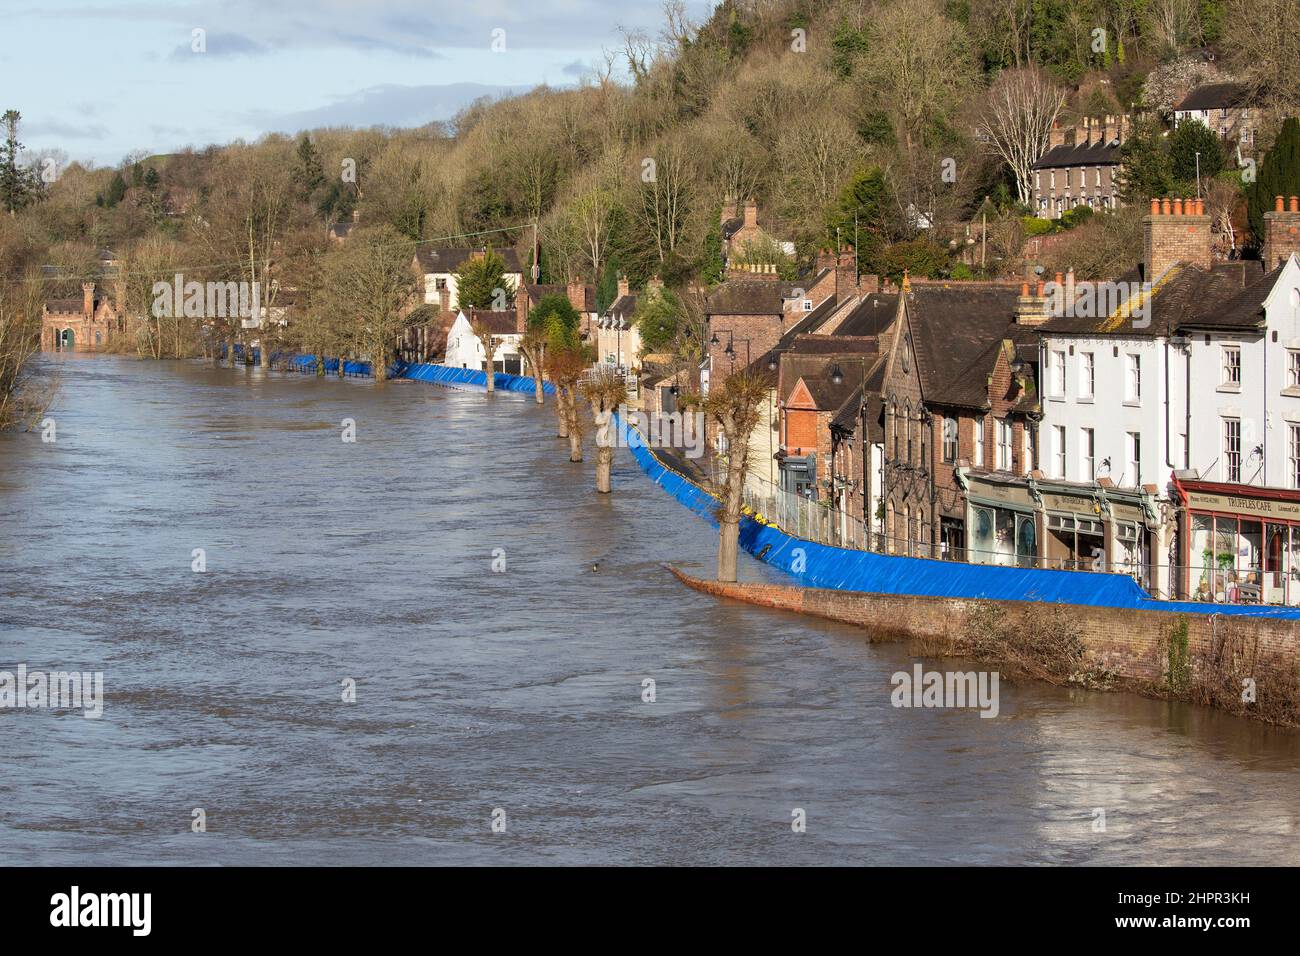 Shropshire, England. 23/02/2022, Flood barriers in the town of Ironbridge in Shropshire, continue to hold back the rising levels of the River Severn, which has been on the rise following a week of storms. All the residents from The Wharfage, the area behind the barriers, have been evacuated, as the risk of the river breaching the barriers remains. Stock Photo